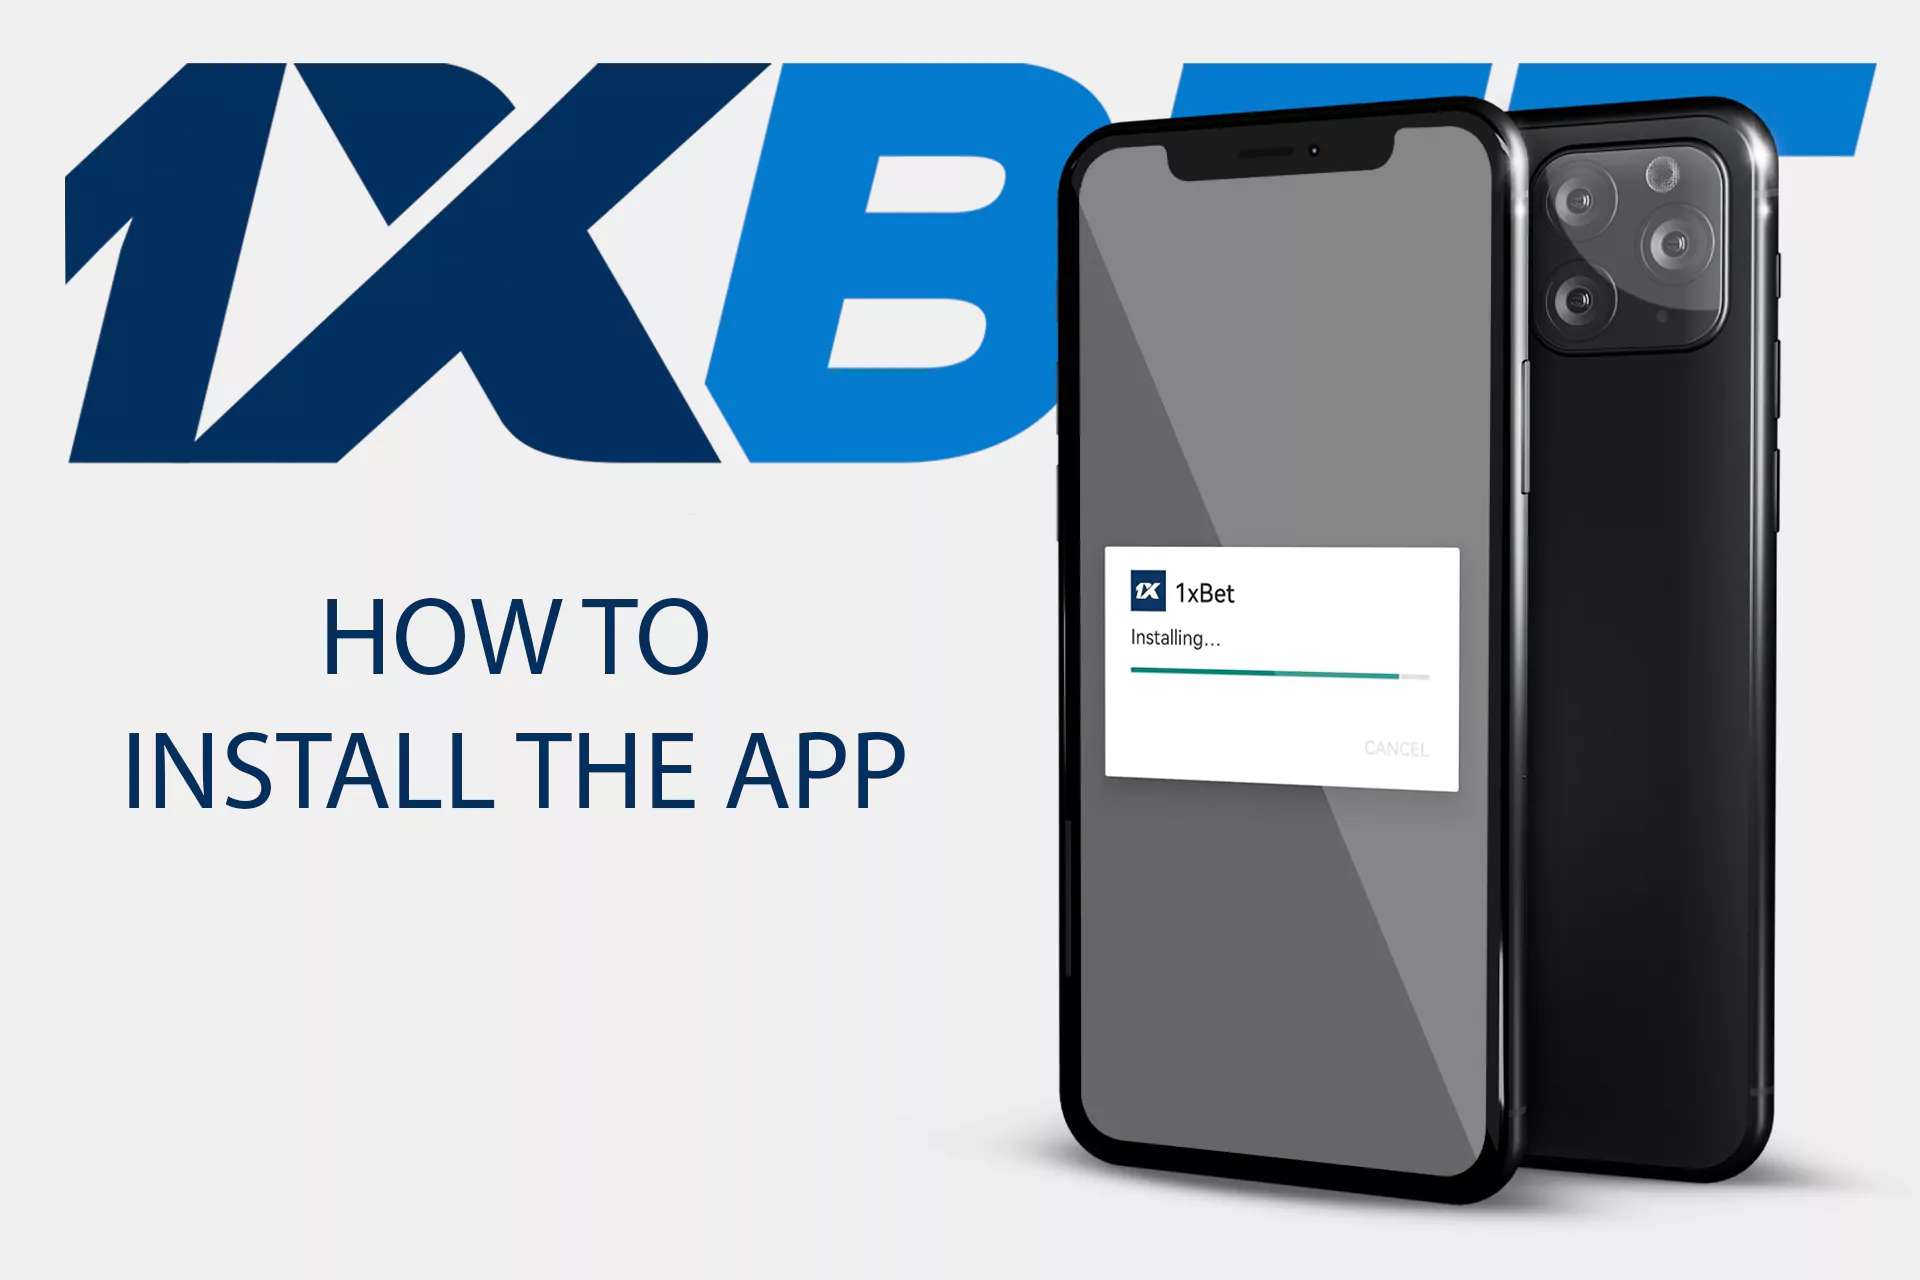 Install the1xBet app by following the official instructions.